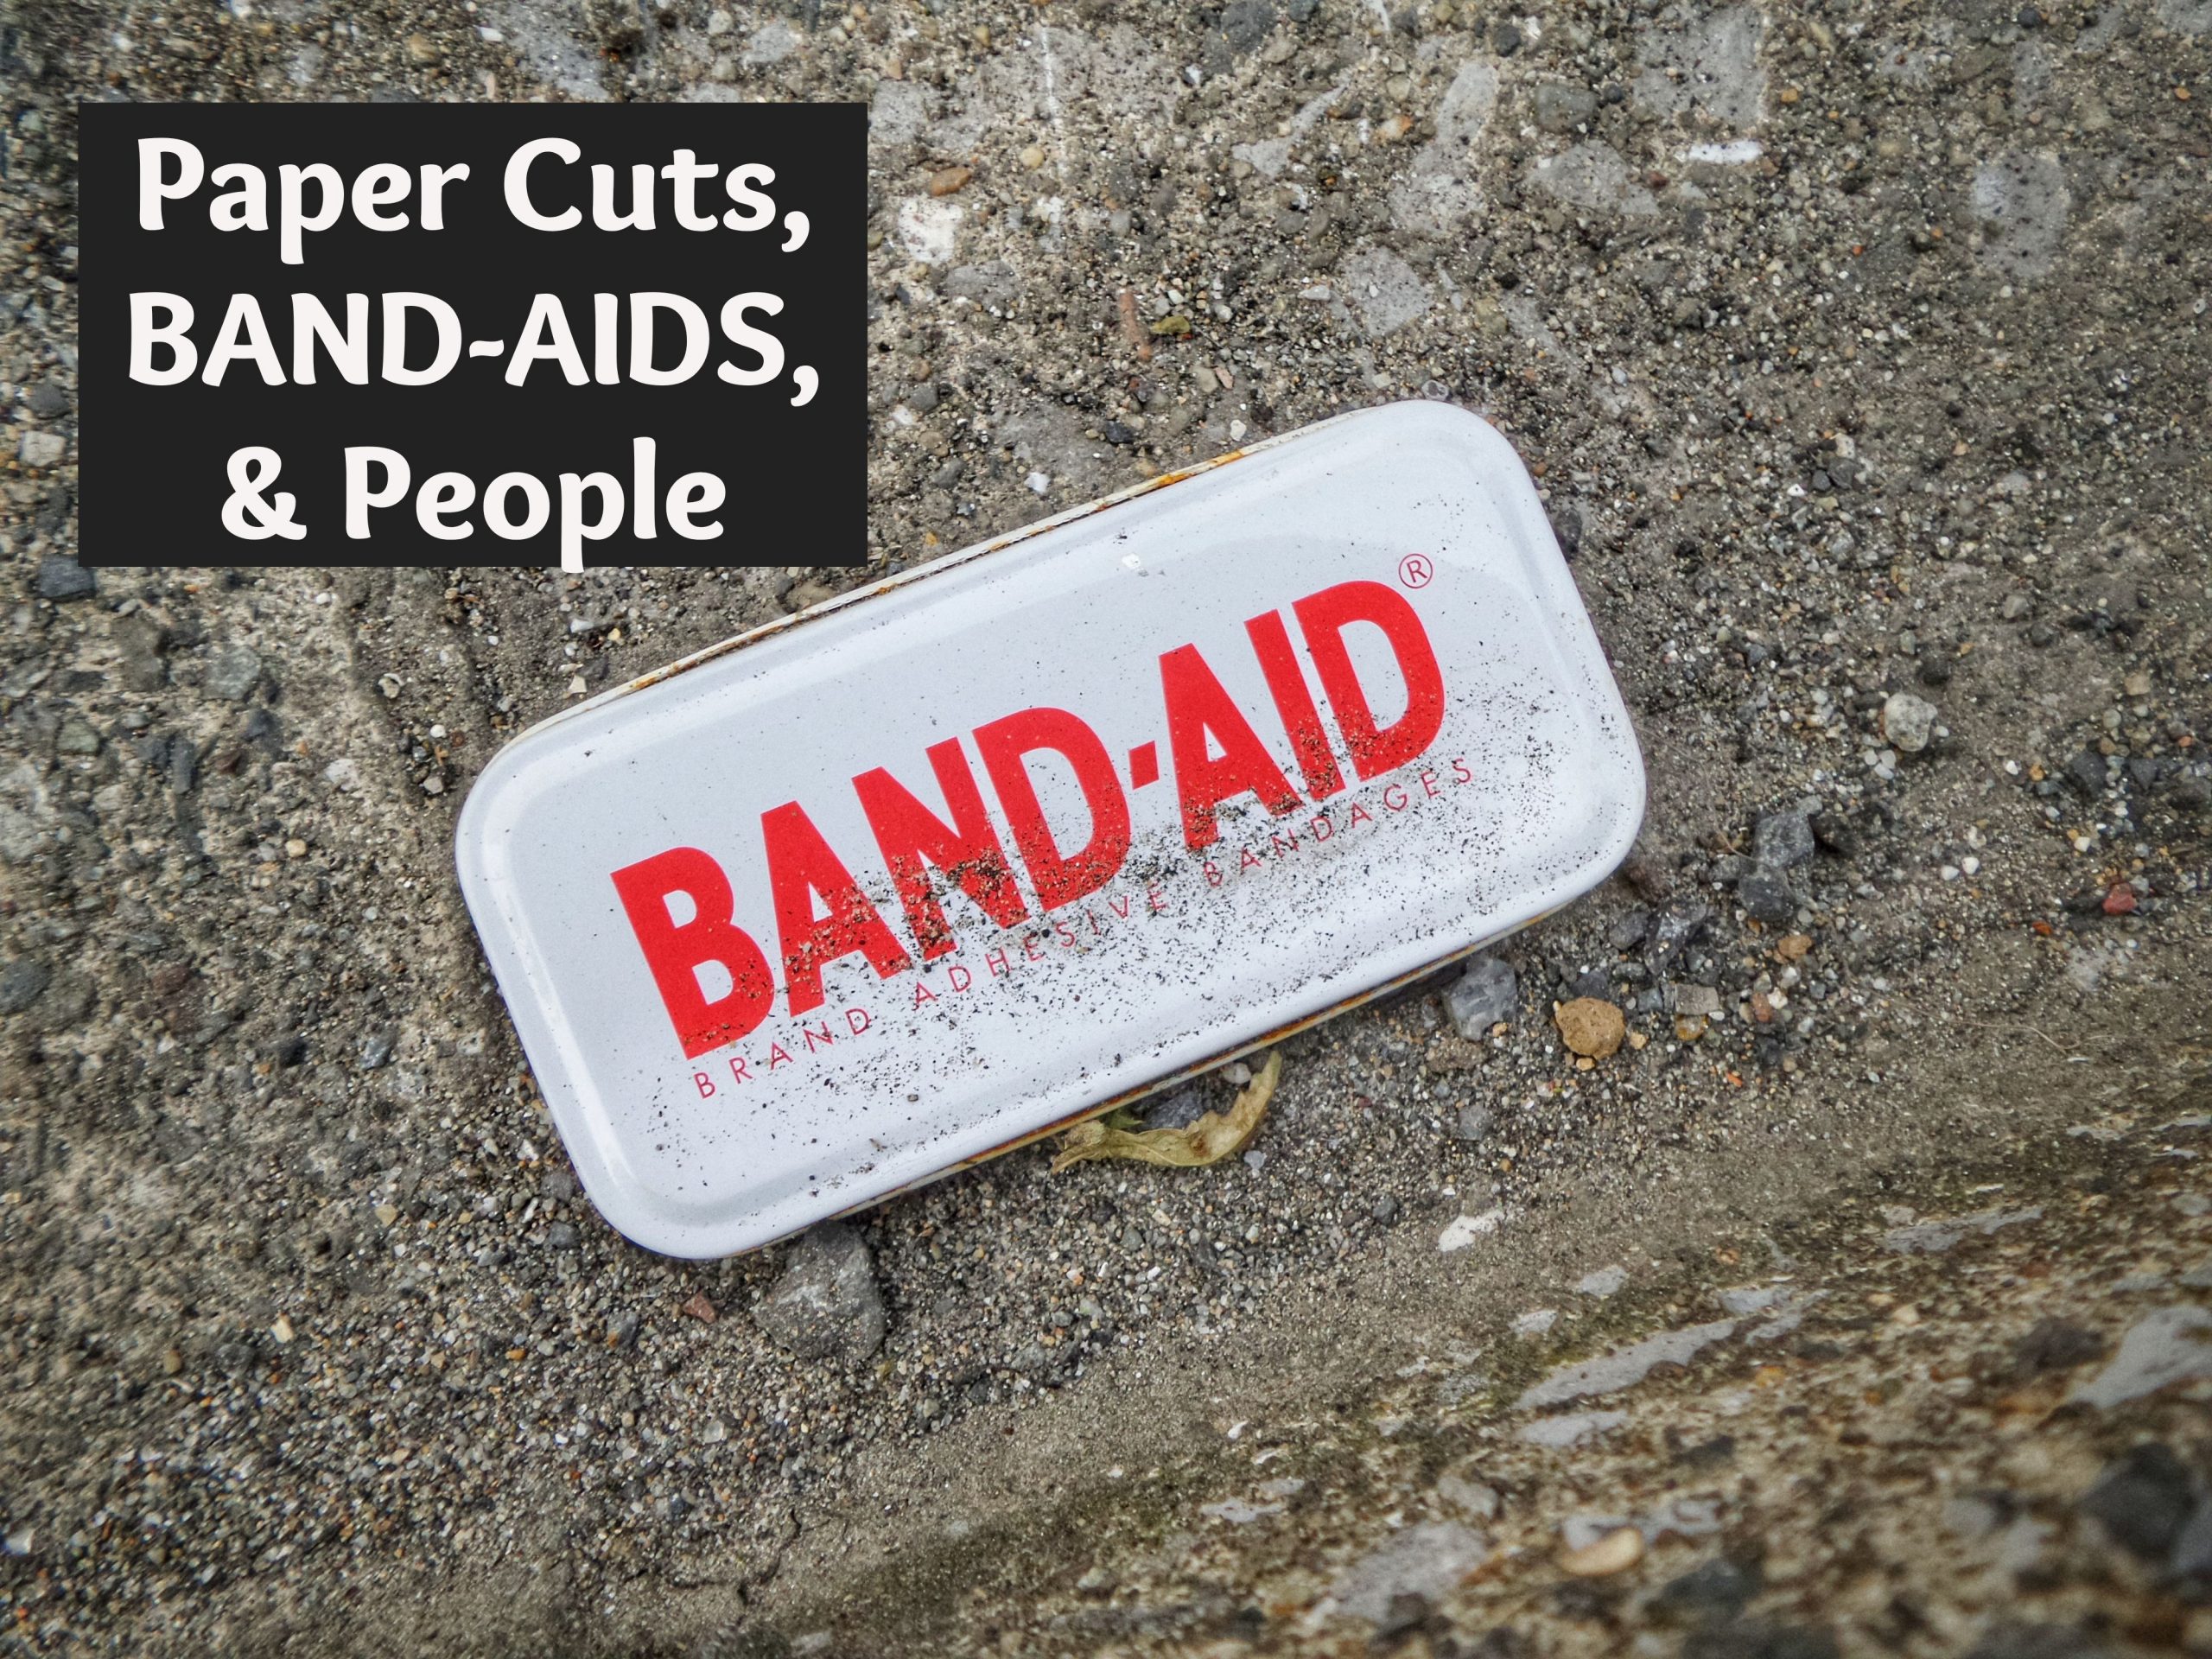 Band-aids & People